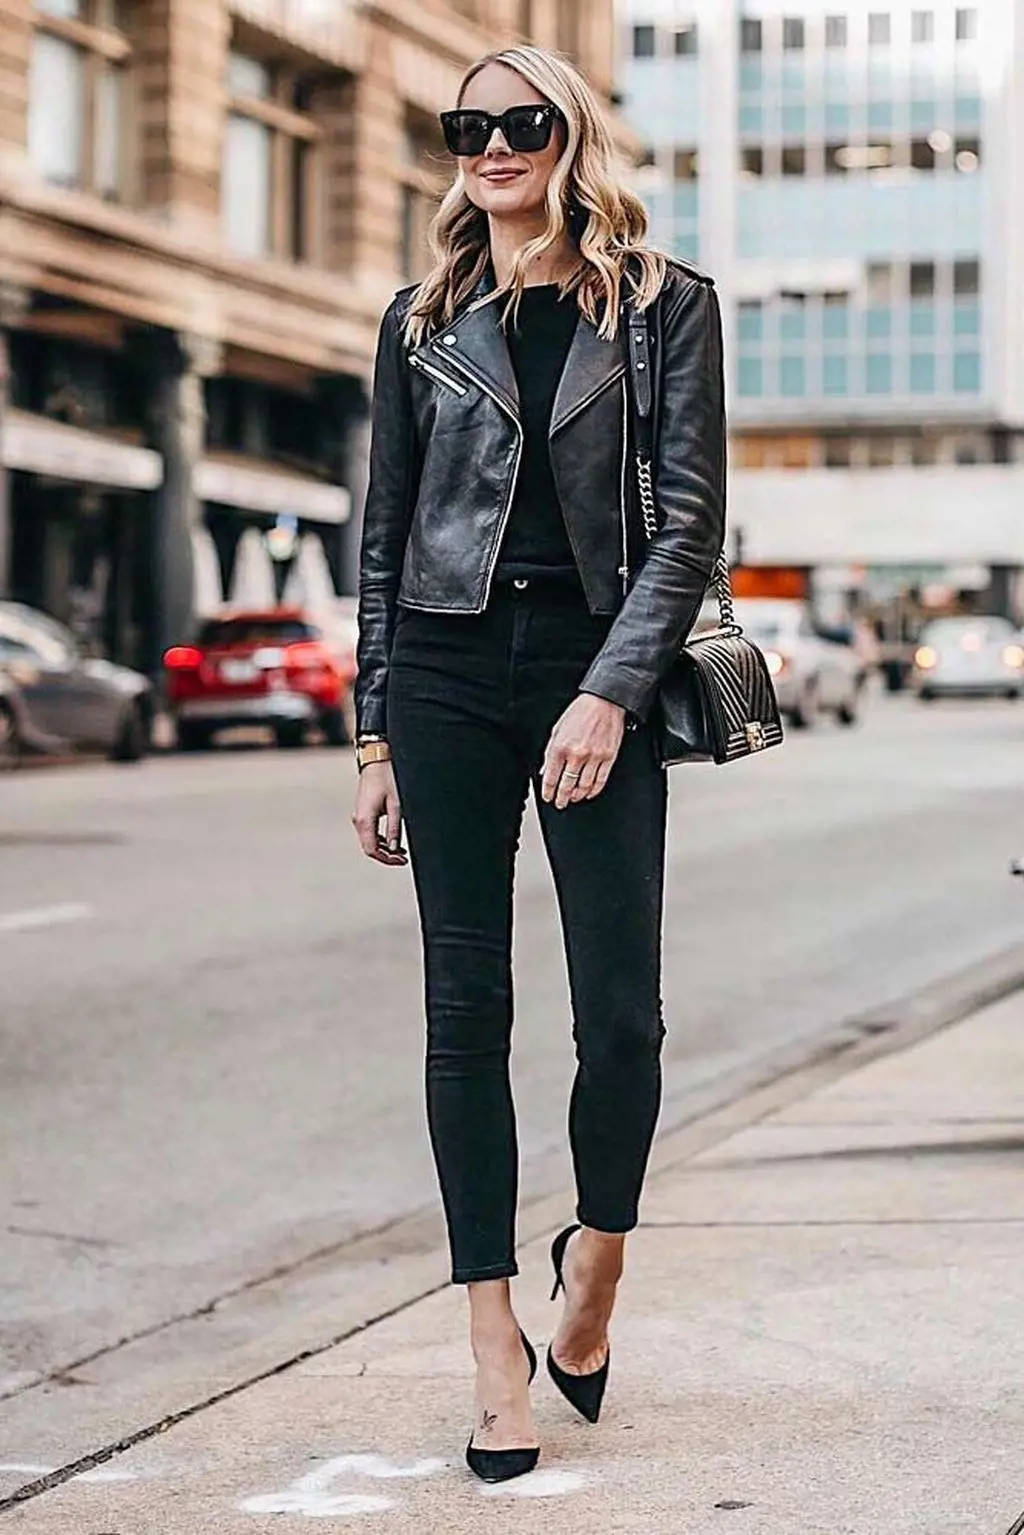 Stylish Outfit Ideas: How To Pair Skinny Jeans And A Leather Jacket ...